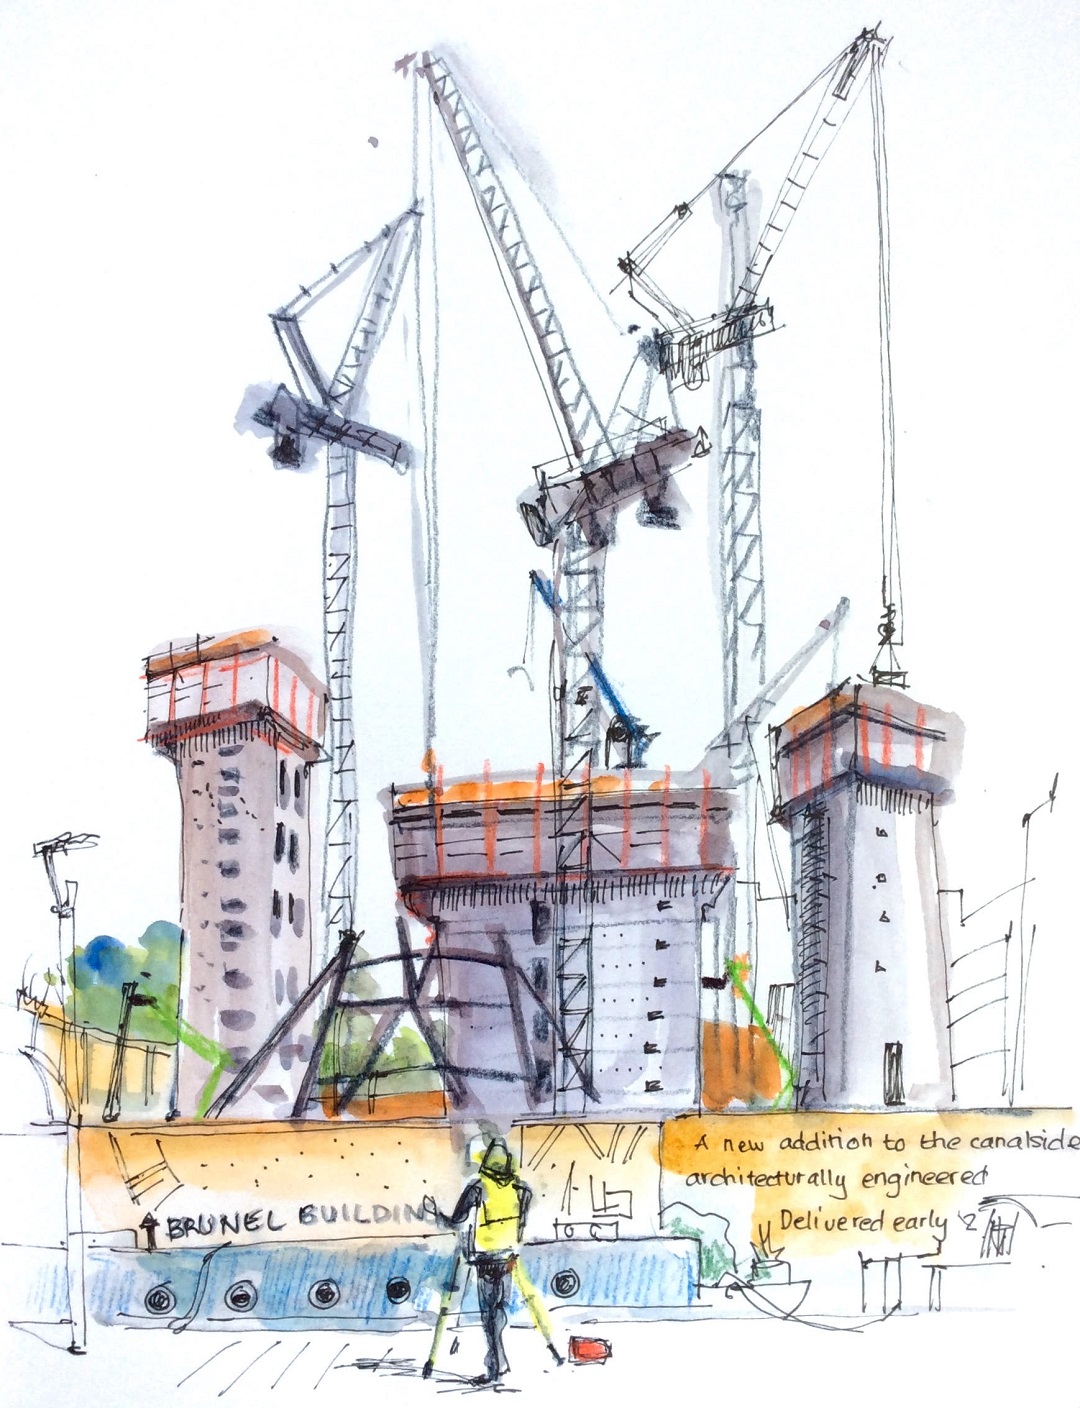 Brunel Building, Paddington, London, August 2017 Katie Clare Pen, wash and coloured pencils, drawn in the artist's Stillman and Bern Alpha Softcover sketchbook, 20 x 25 cm